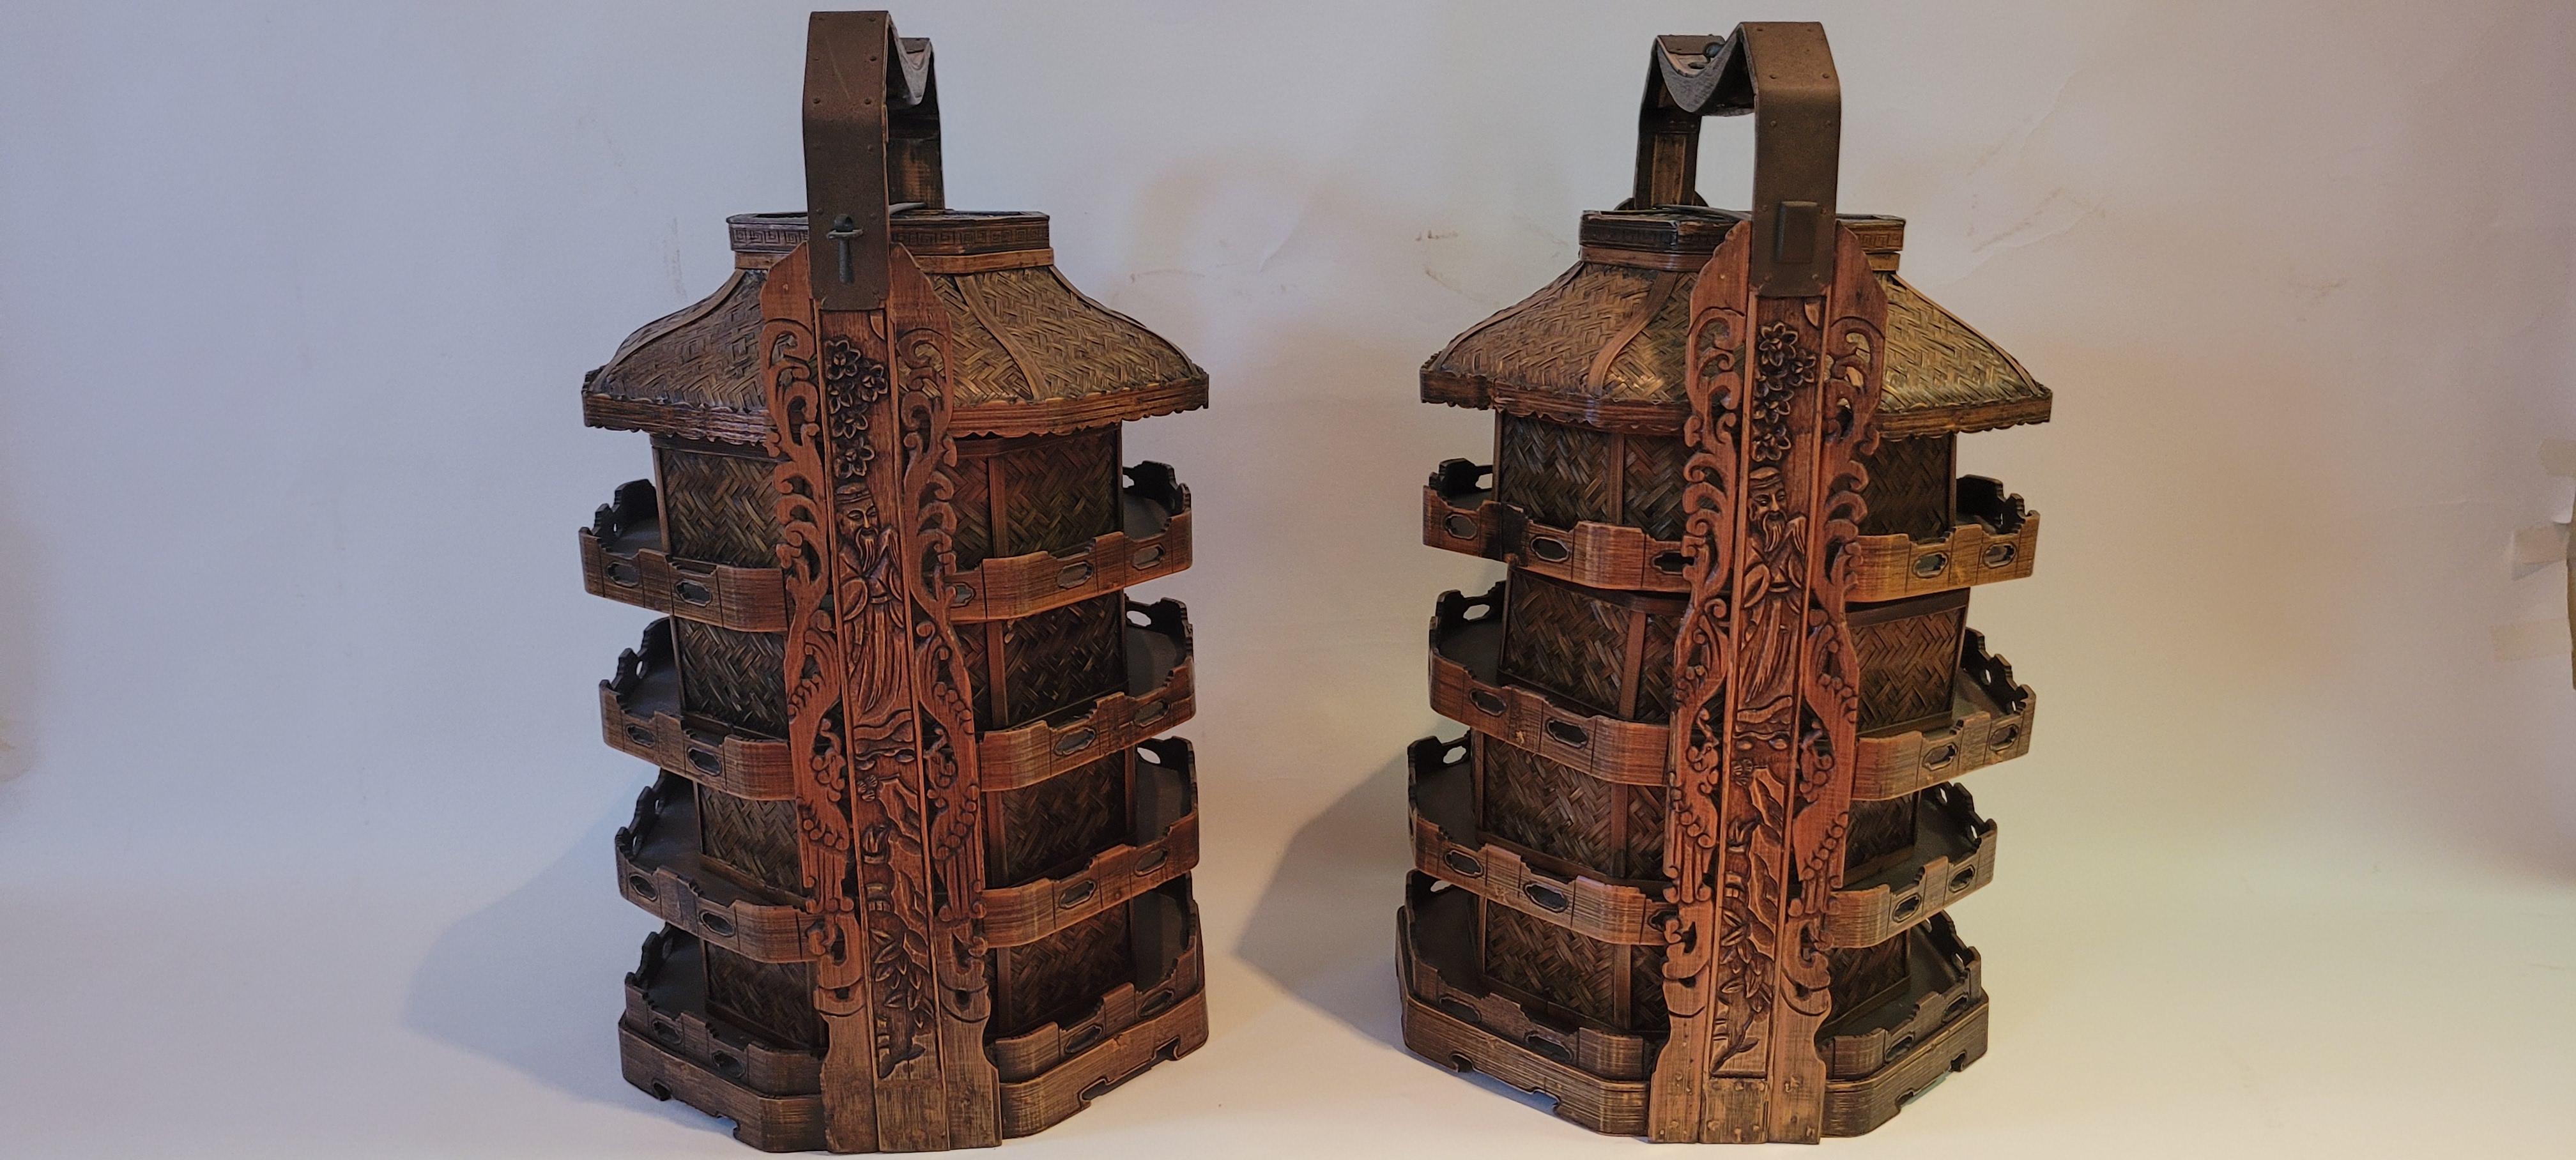 Pair of Five Tiered Baskets, 19th Century In Good Condition For Sale In Santa Monica, CA